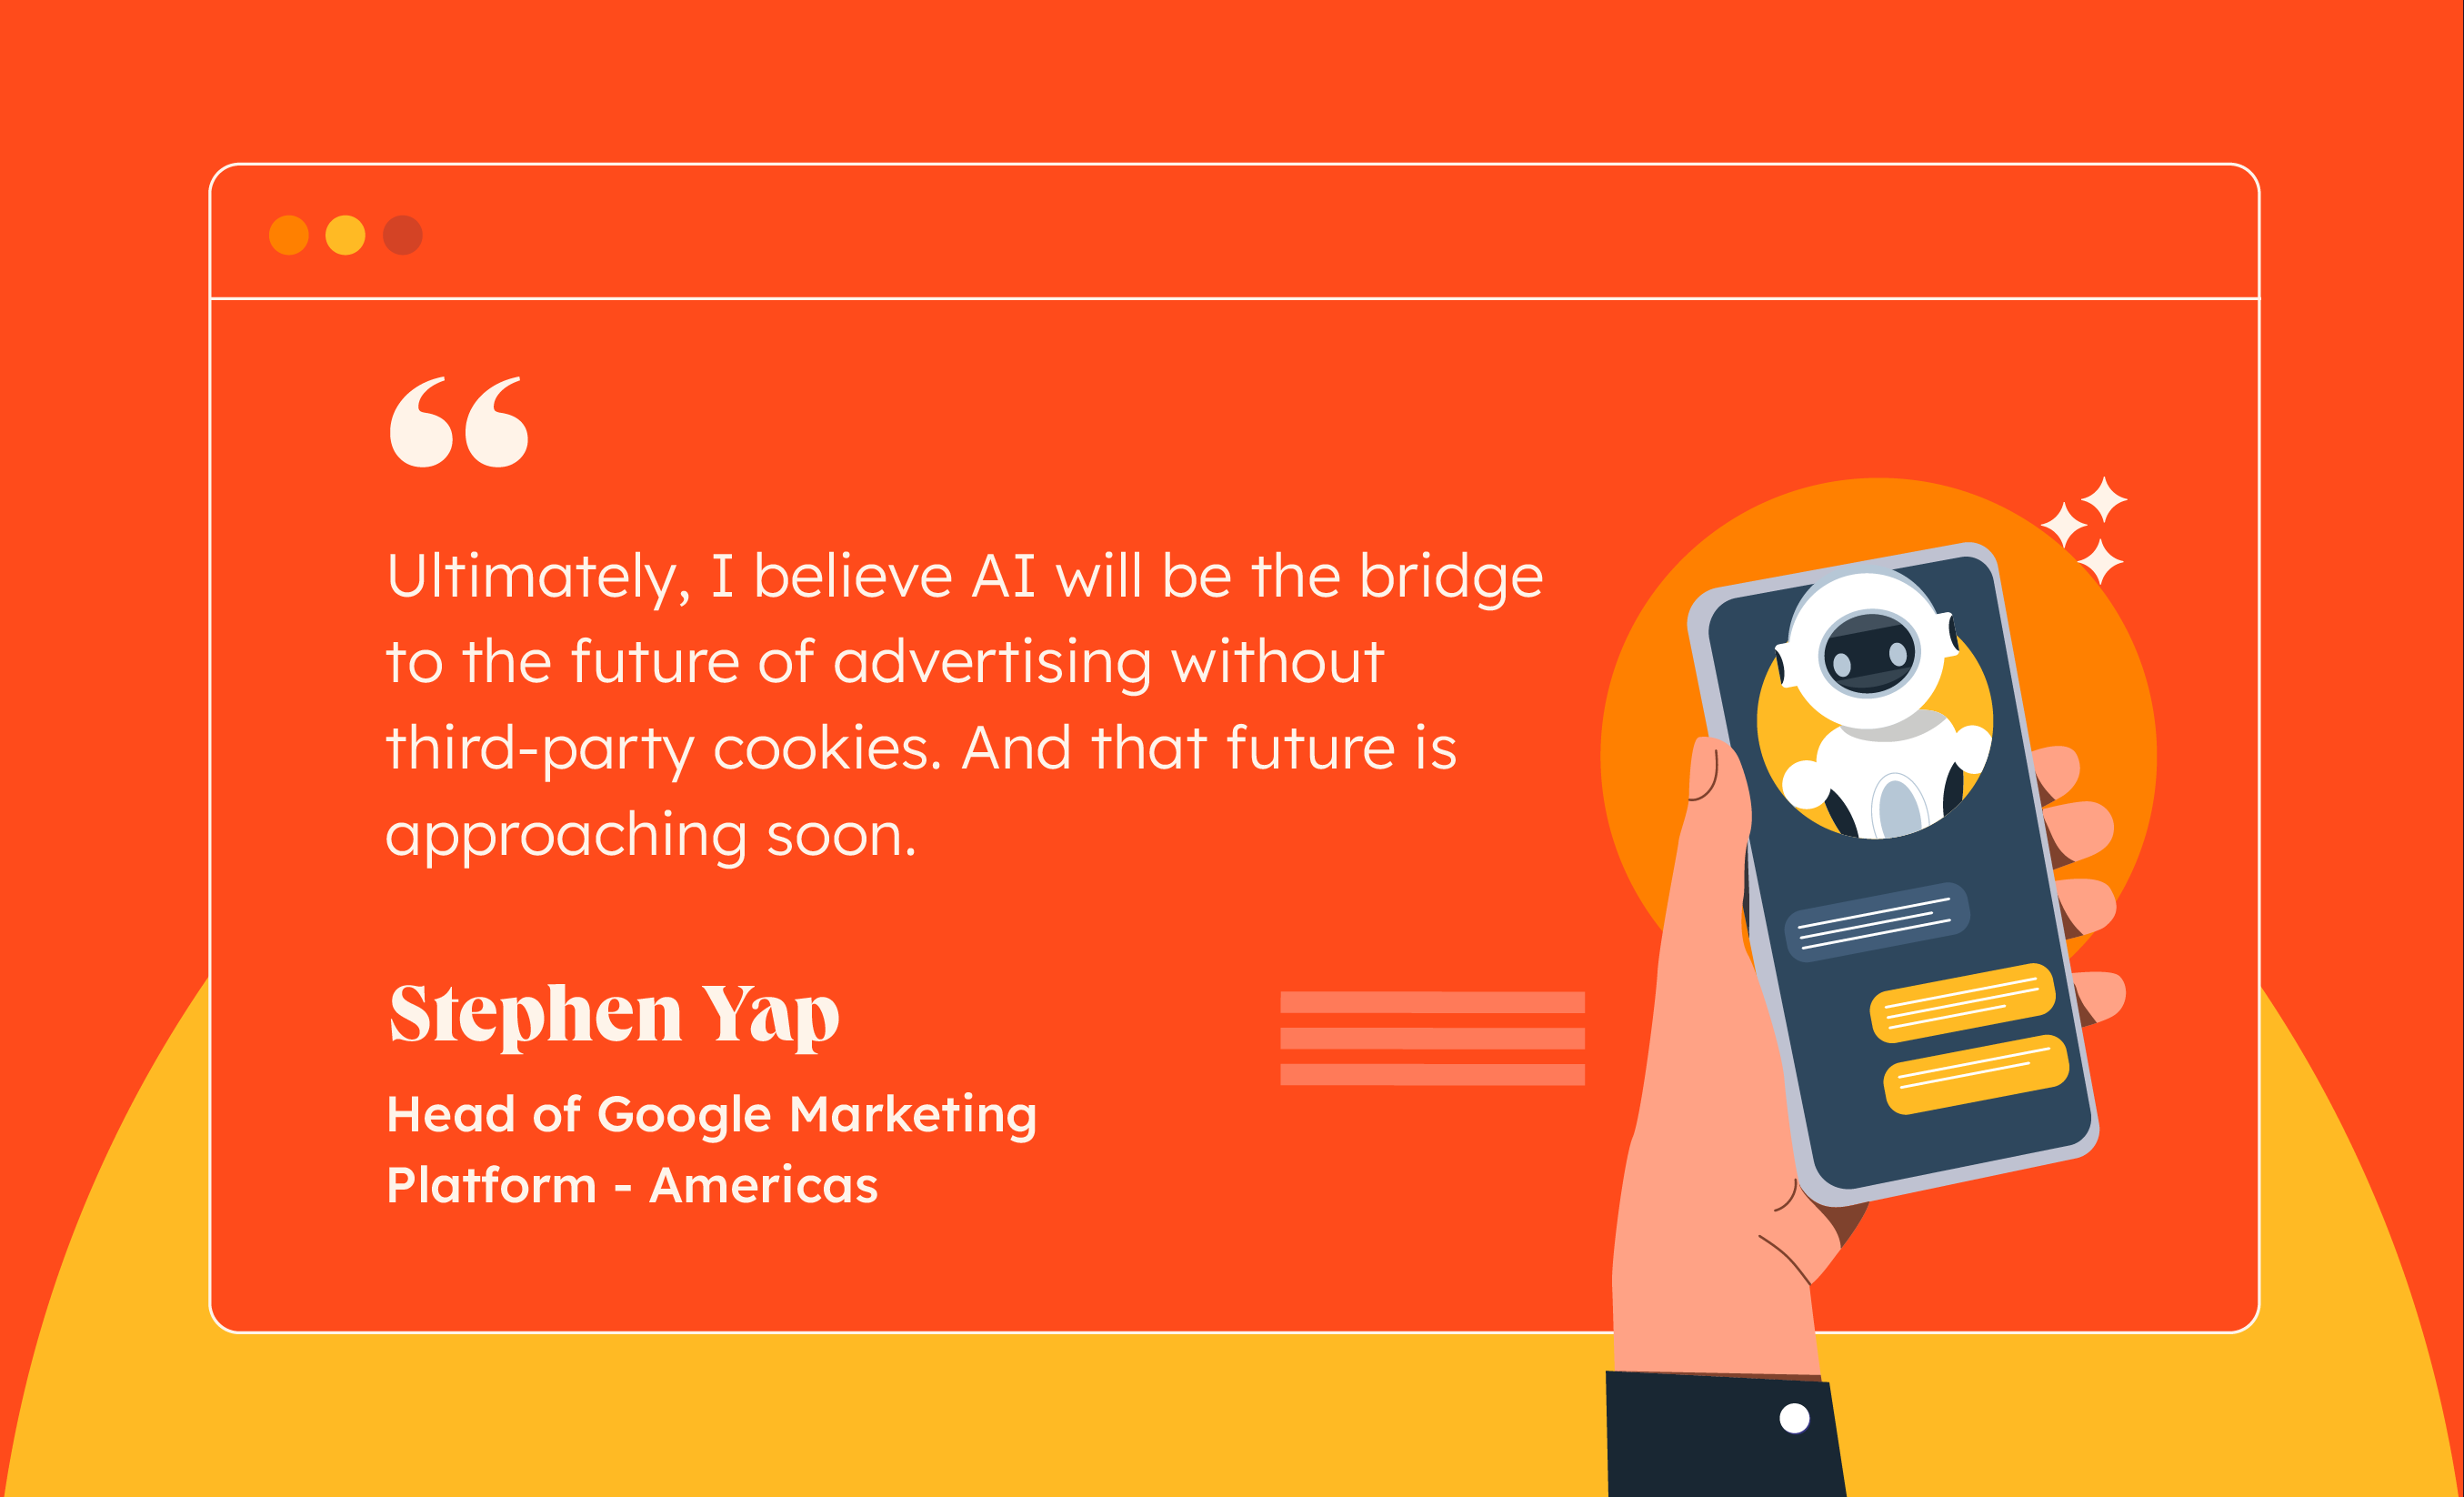 stephen yap about on AI and advertising